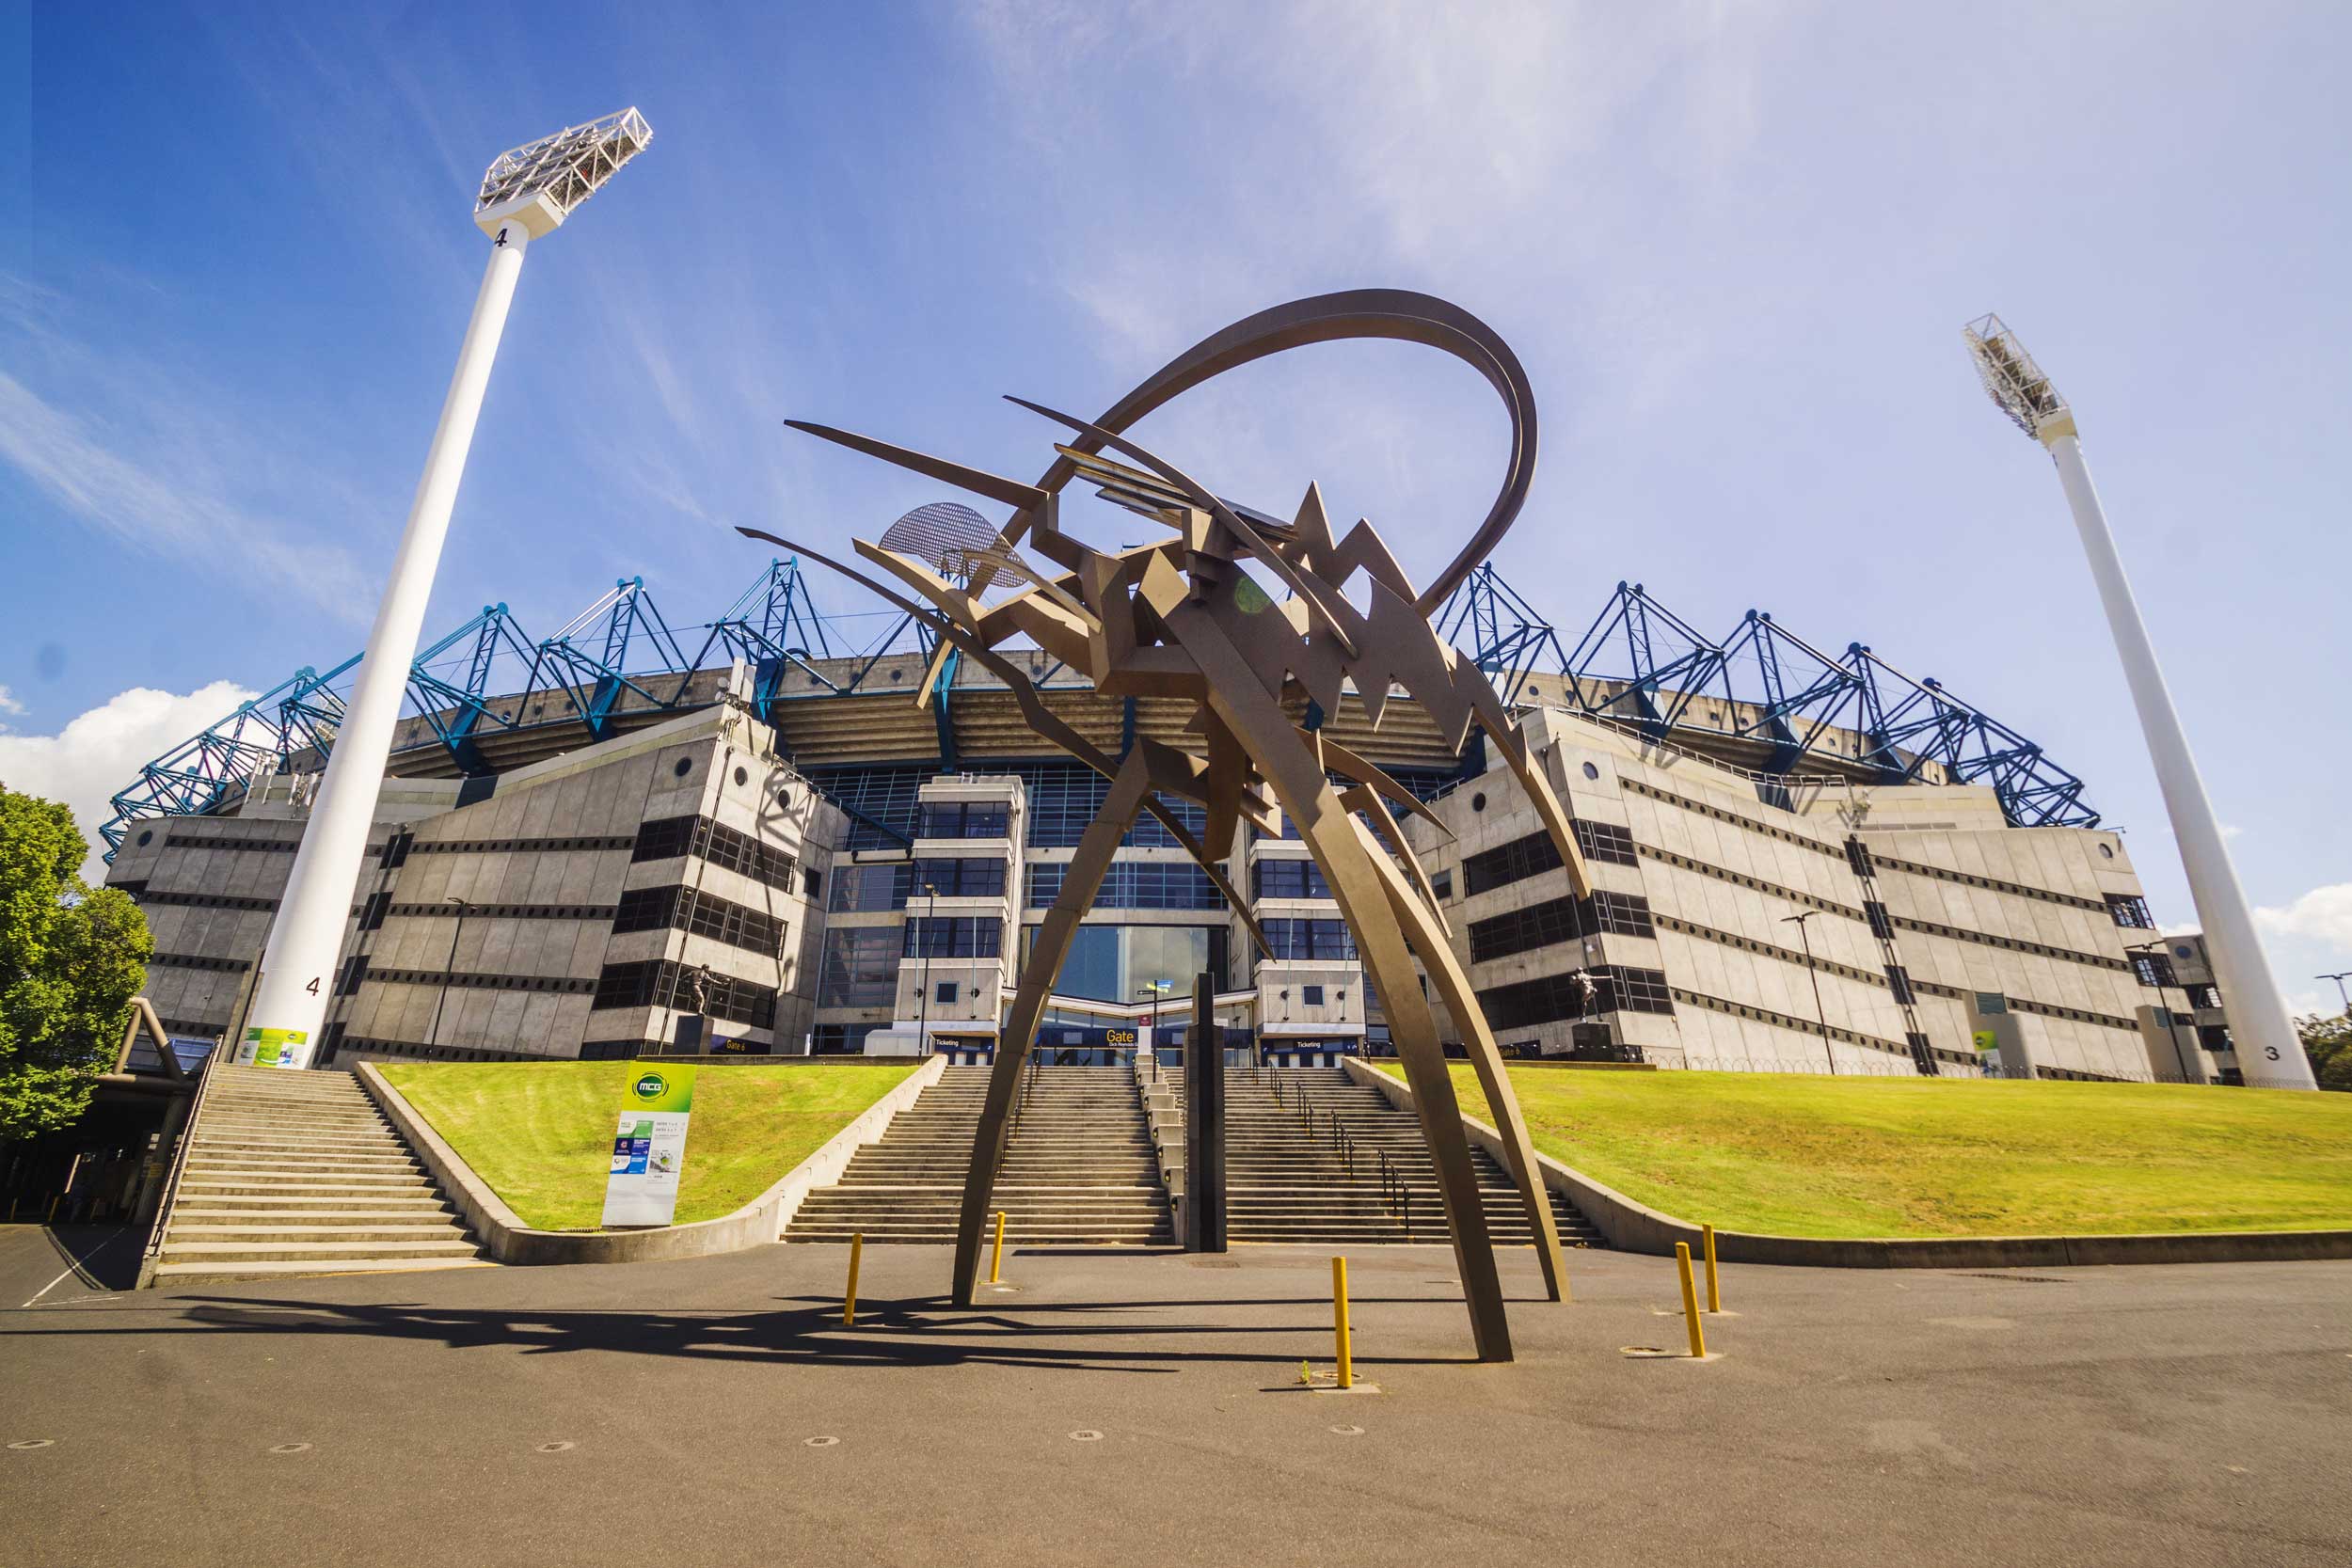 A large metal sculpture in front of a circular building, MCG, Melbourne